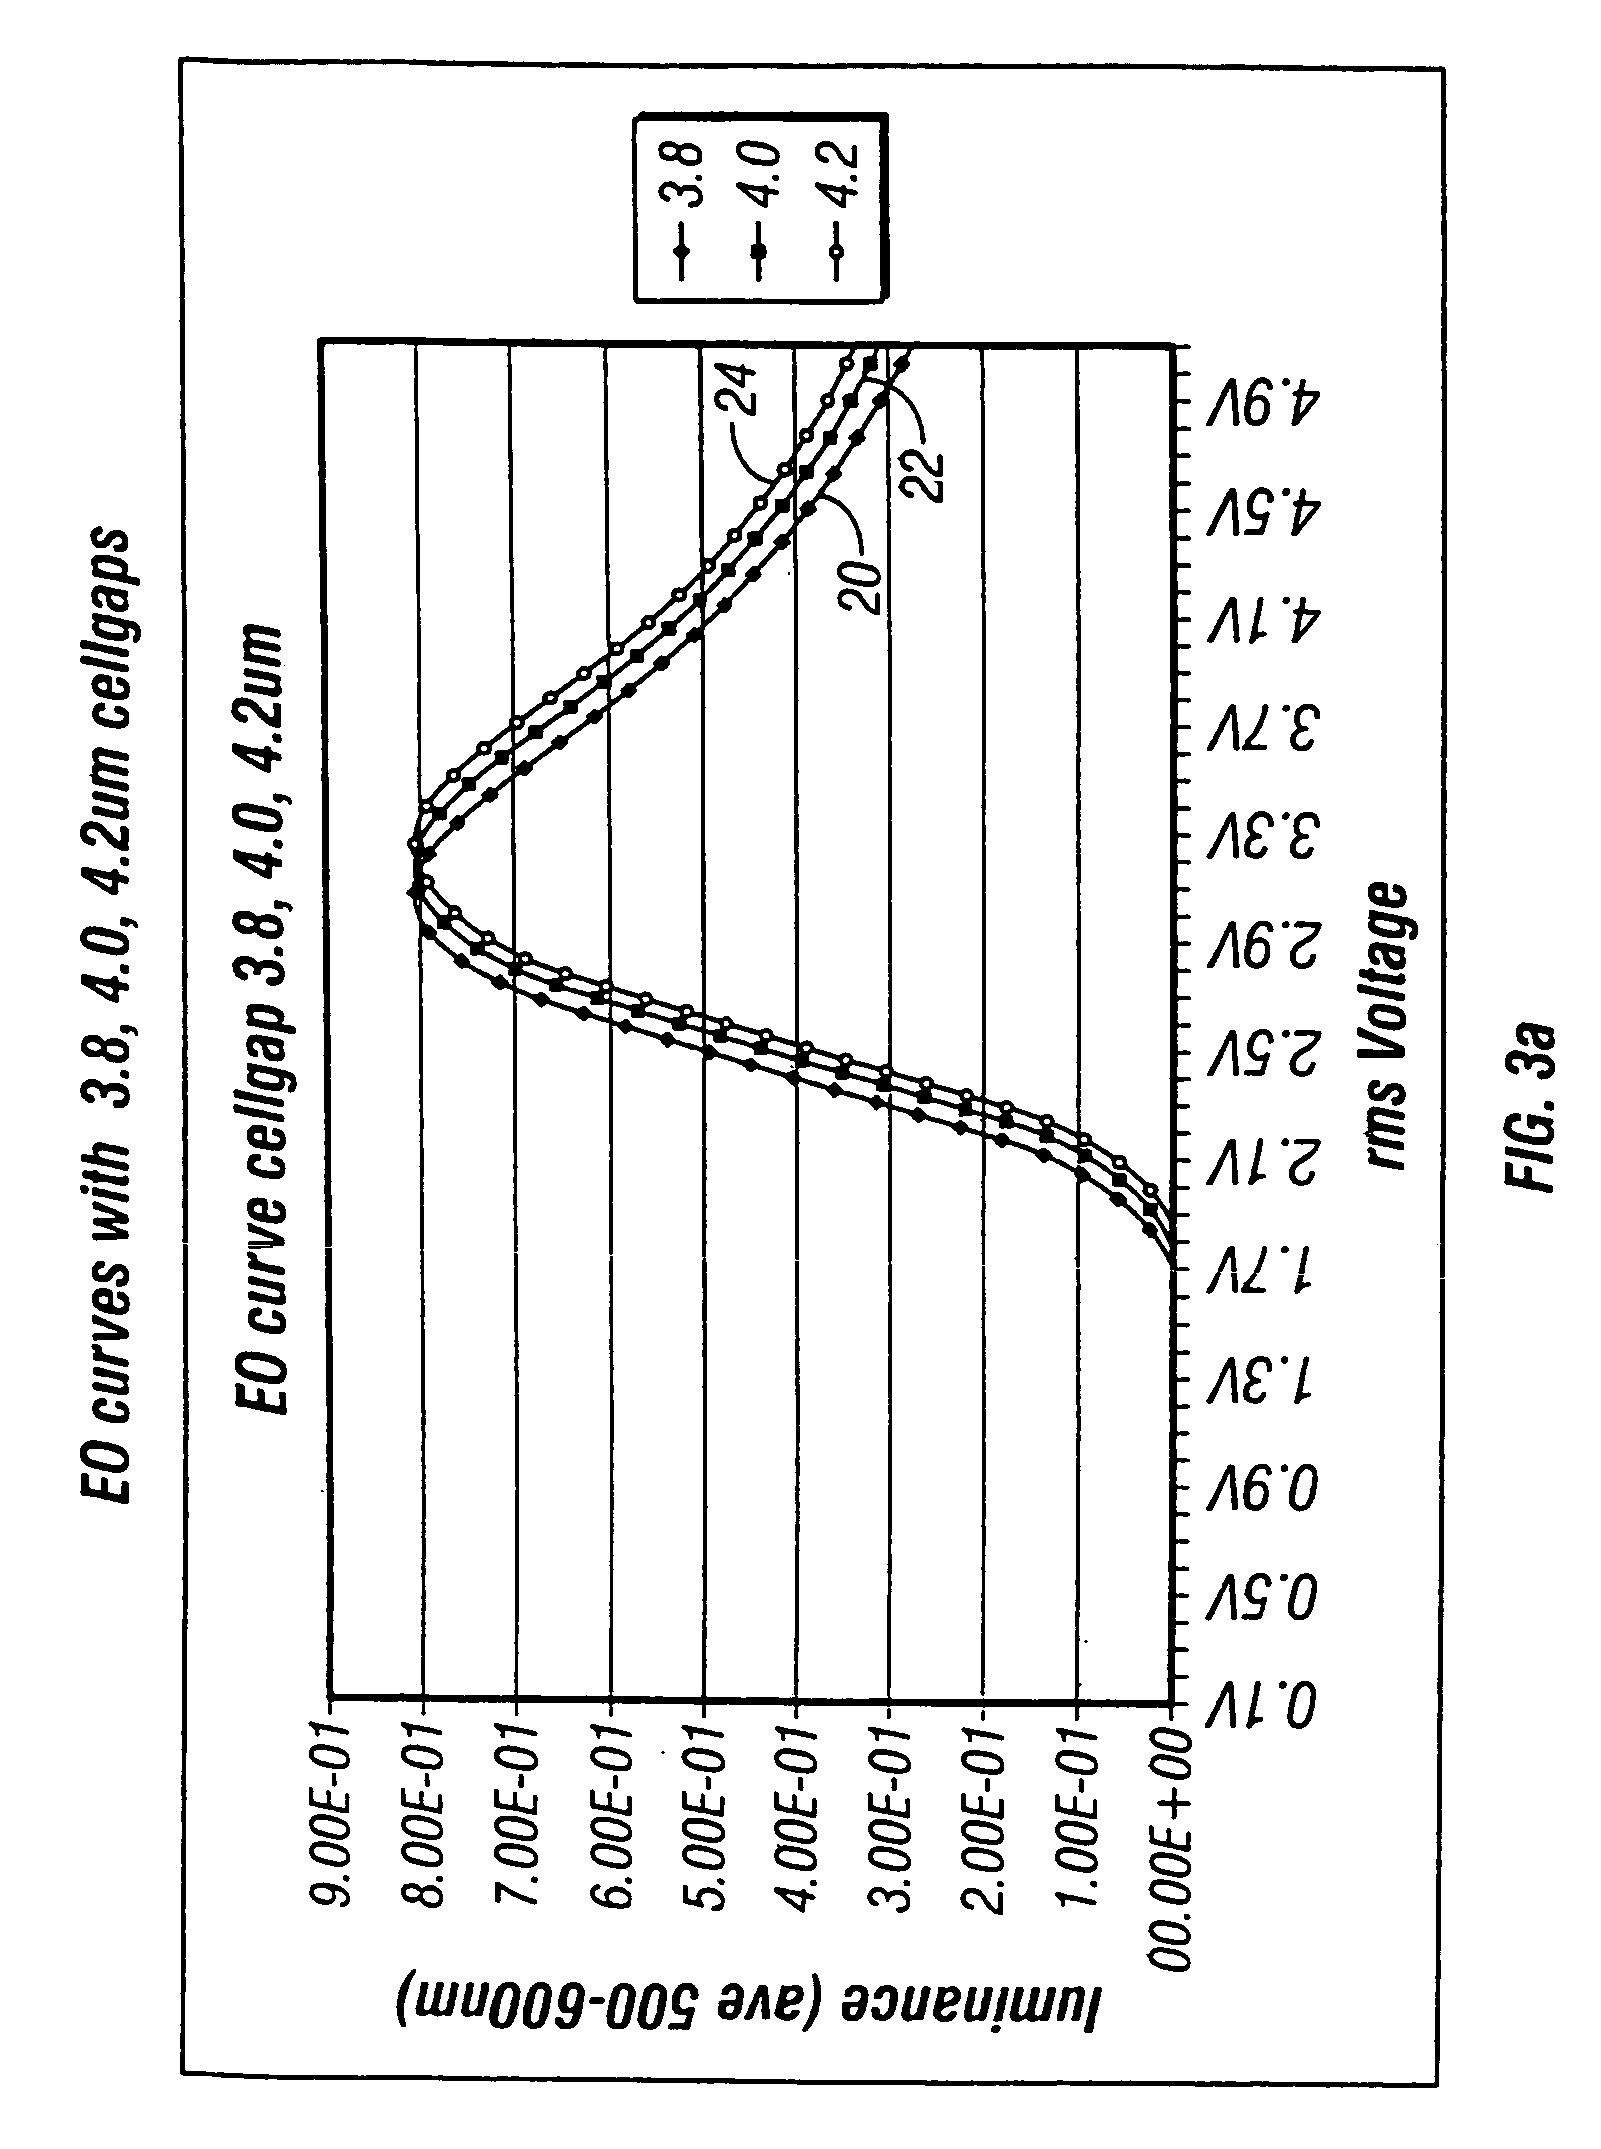 Method and apparatus for reducing the visual effects of nonuniformities in display systems